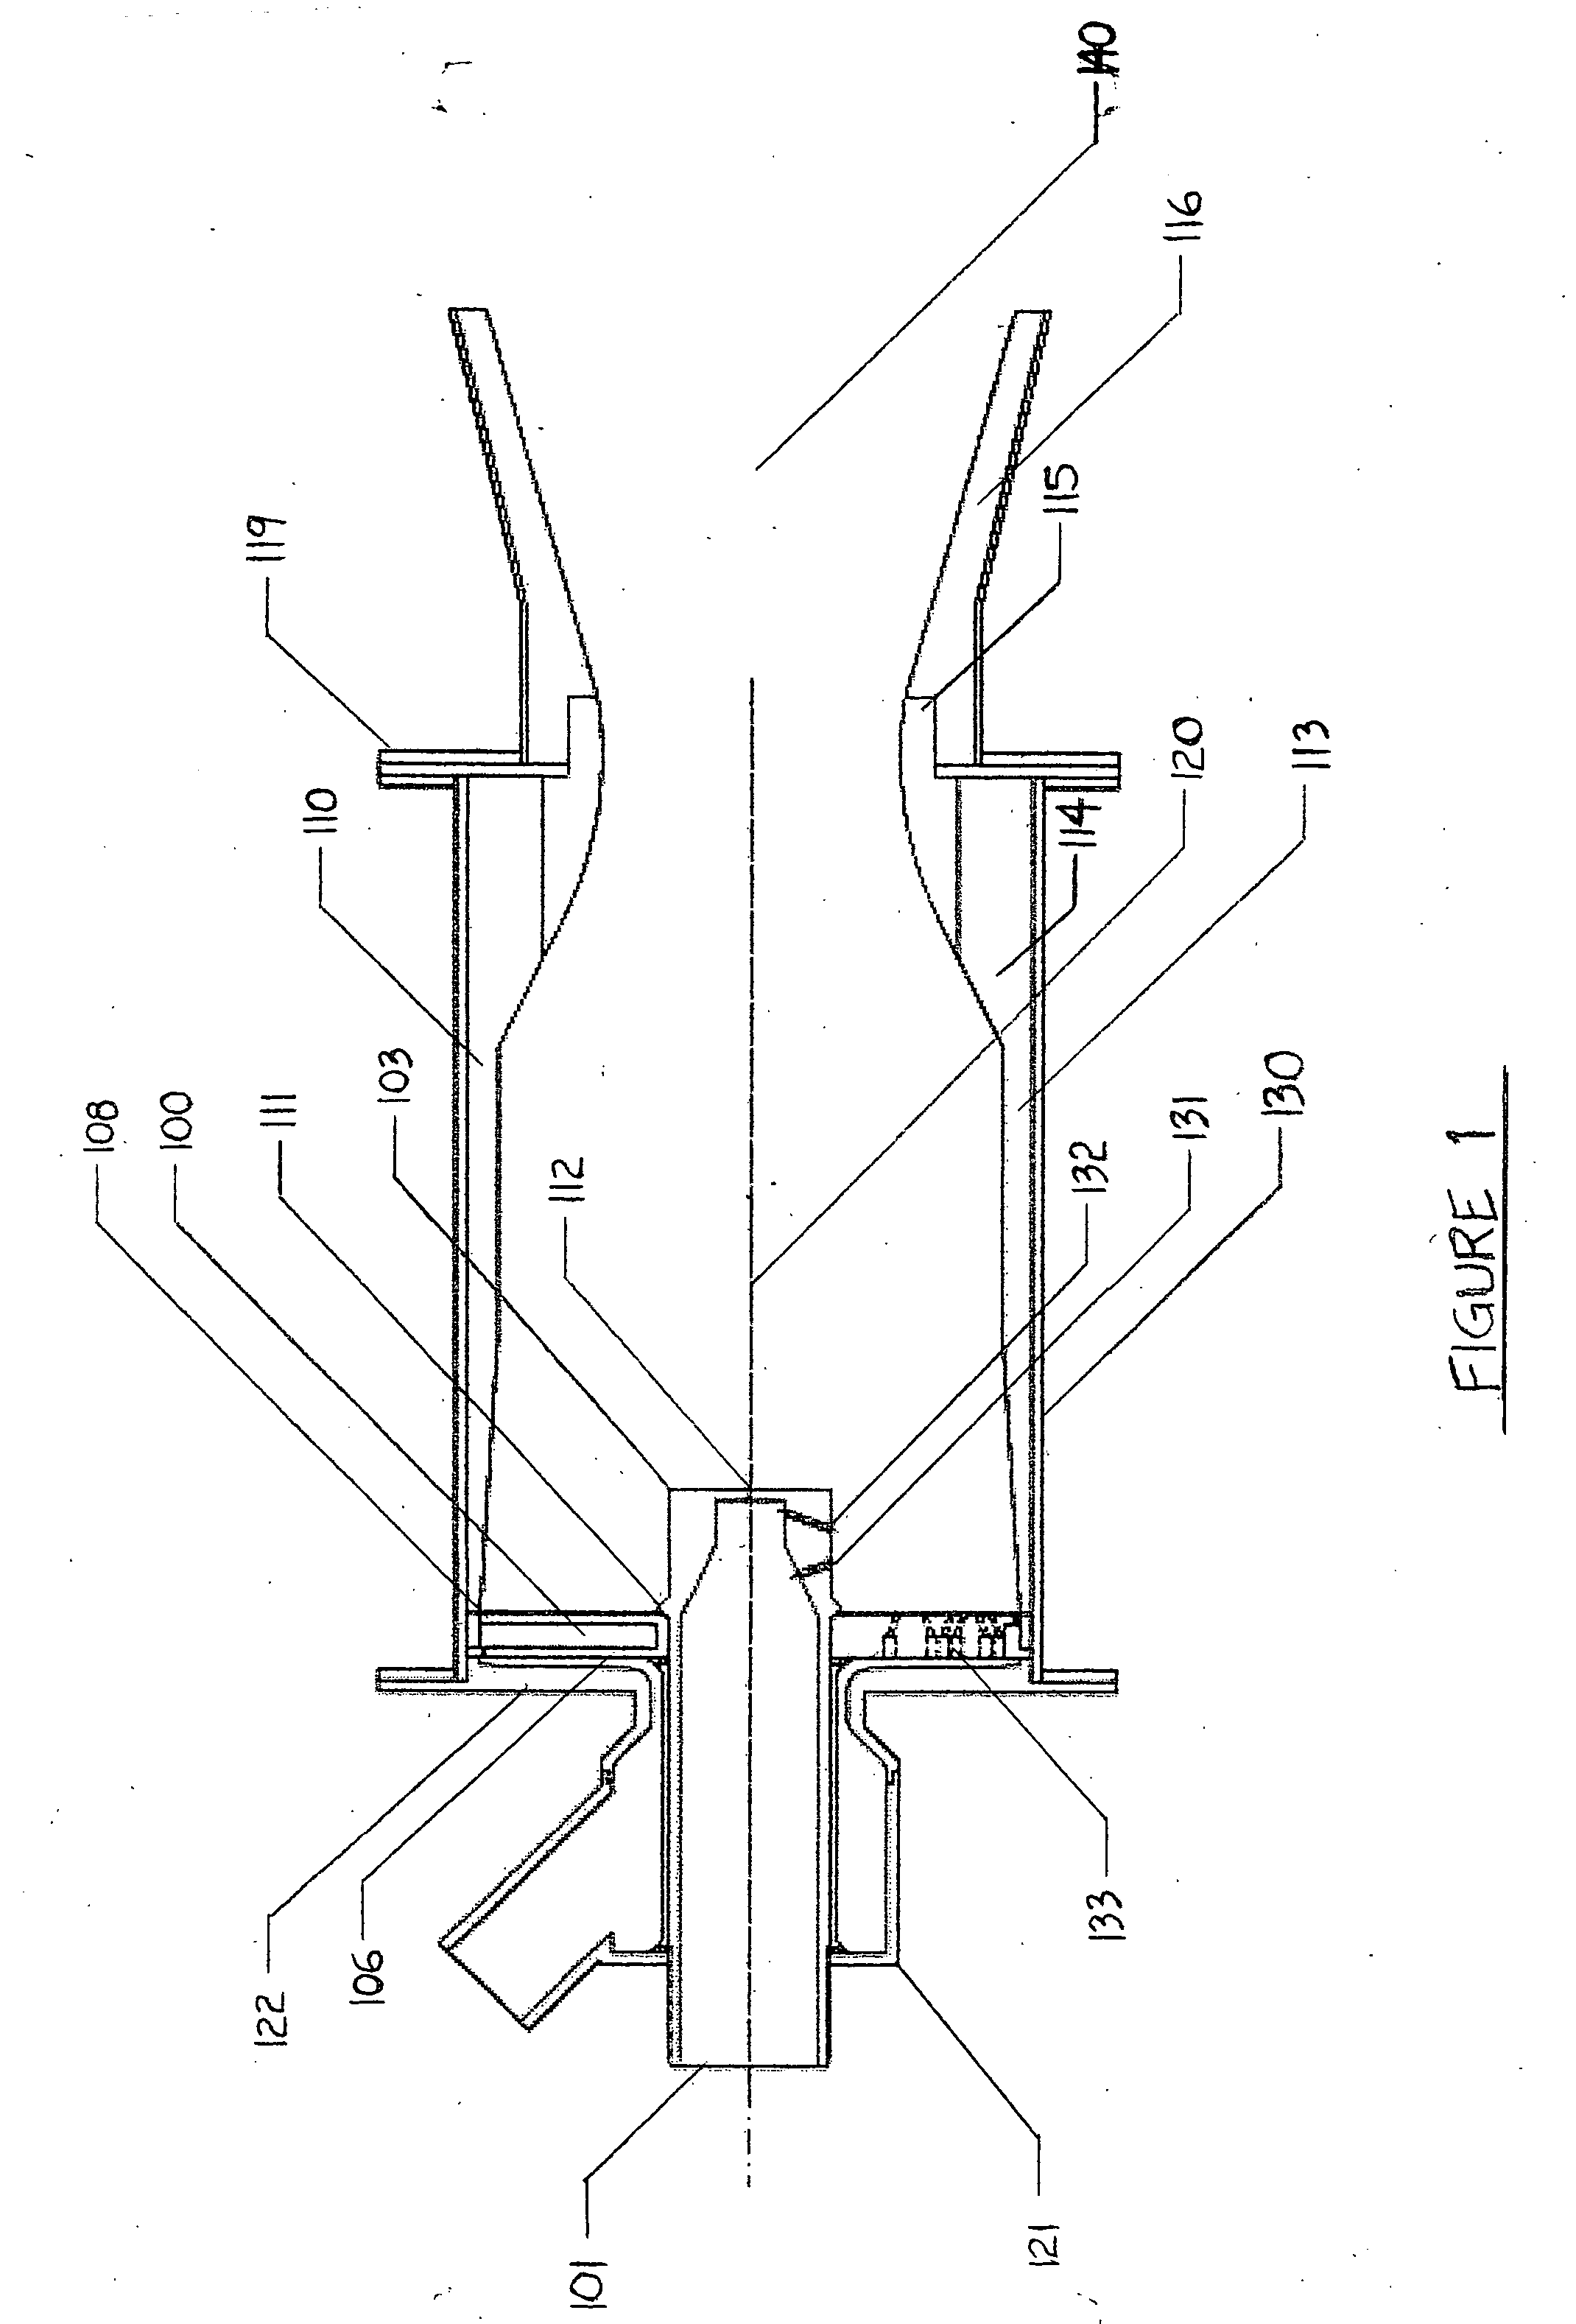 Liquid propellant rocket engine with pintle injector and acoustic dampening